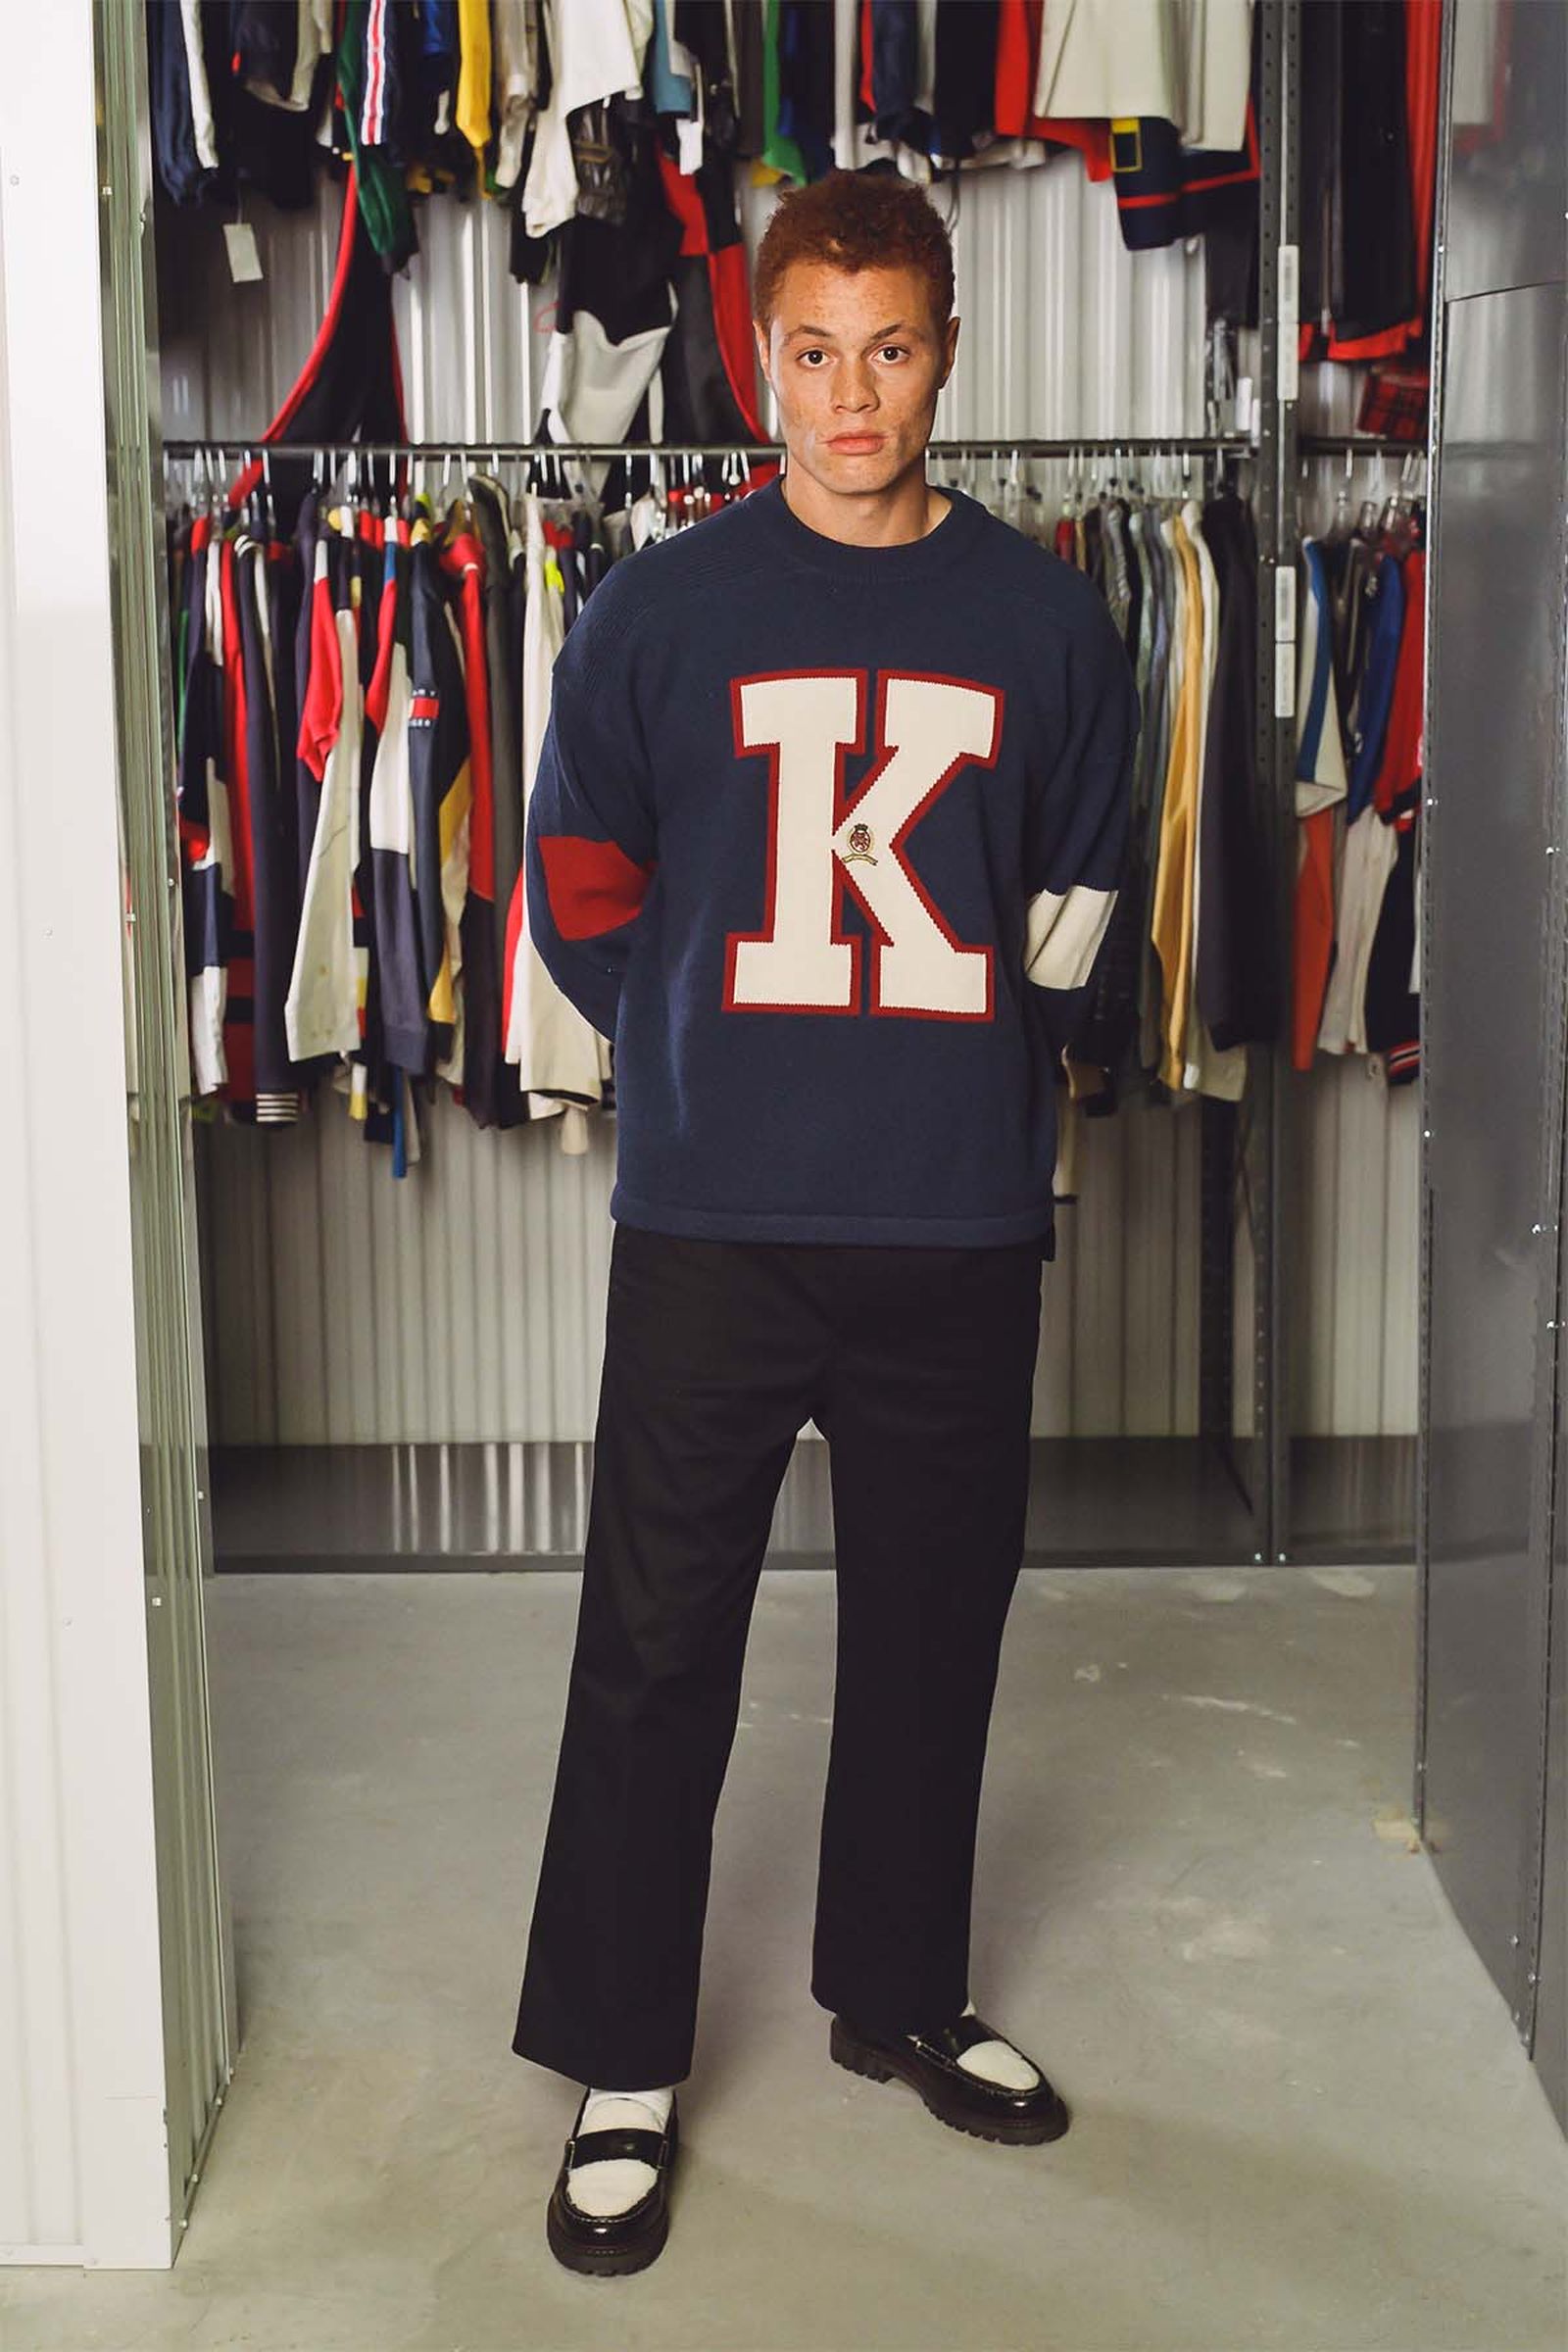 Tommy Hilfiger x KITH Wool Varsity K Sweater (FW18), Hilfiger Collection Men’s Relaxed Pleated Chino and Boat Shoes (Fall 2020)